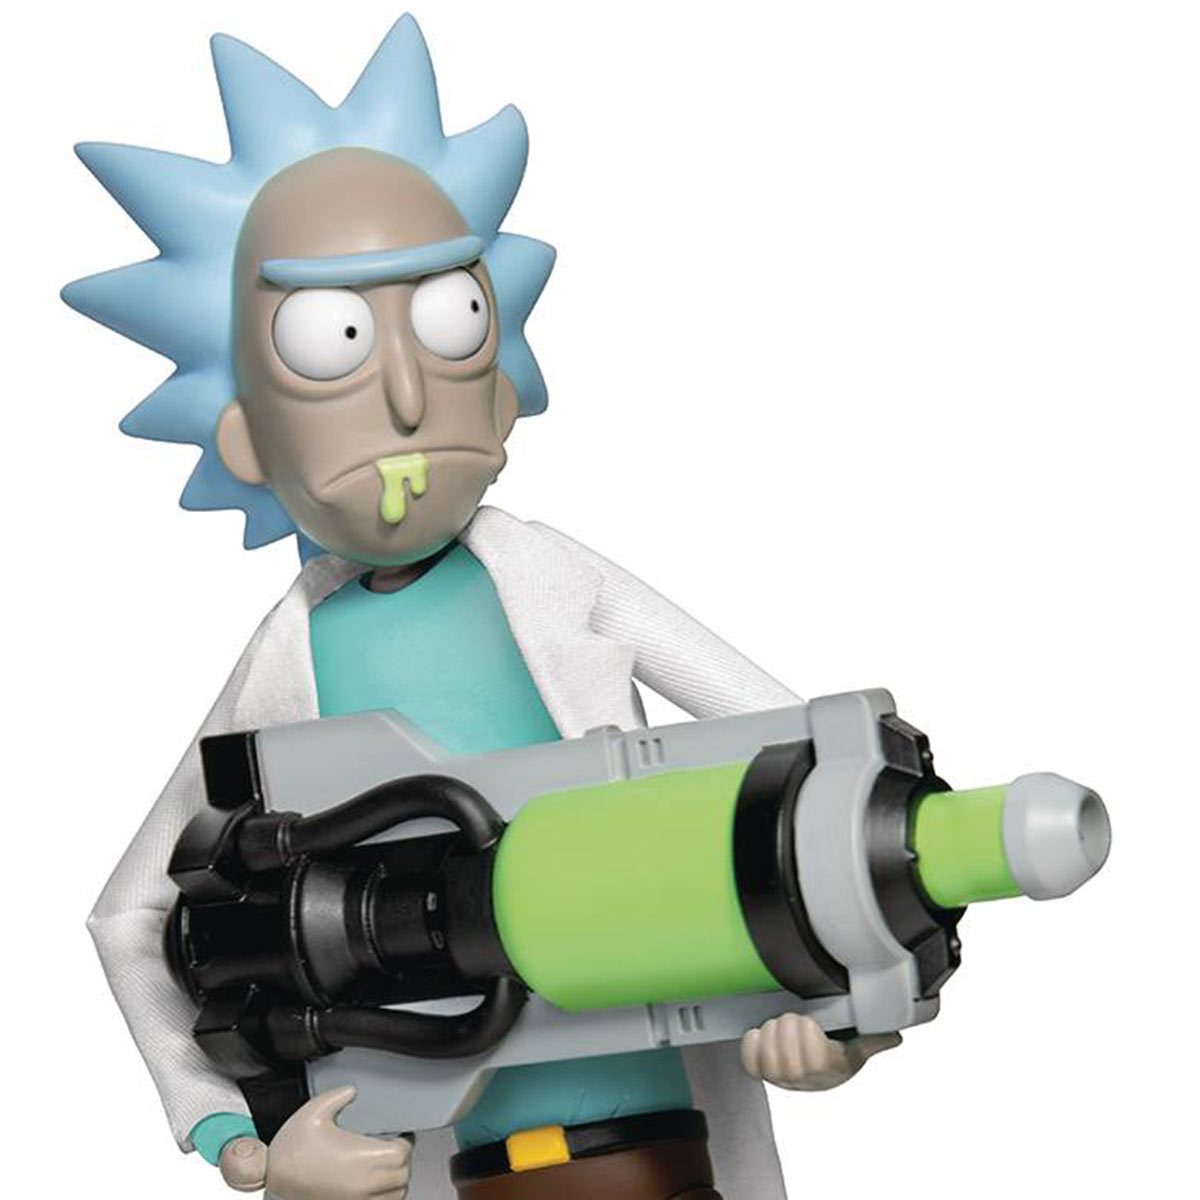 Action Figure Insider » New Rick and Morty Tabletop Games Announced by  @Cryptozoic and @CartoonNetwork Enterprises